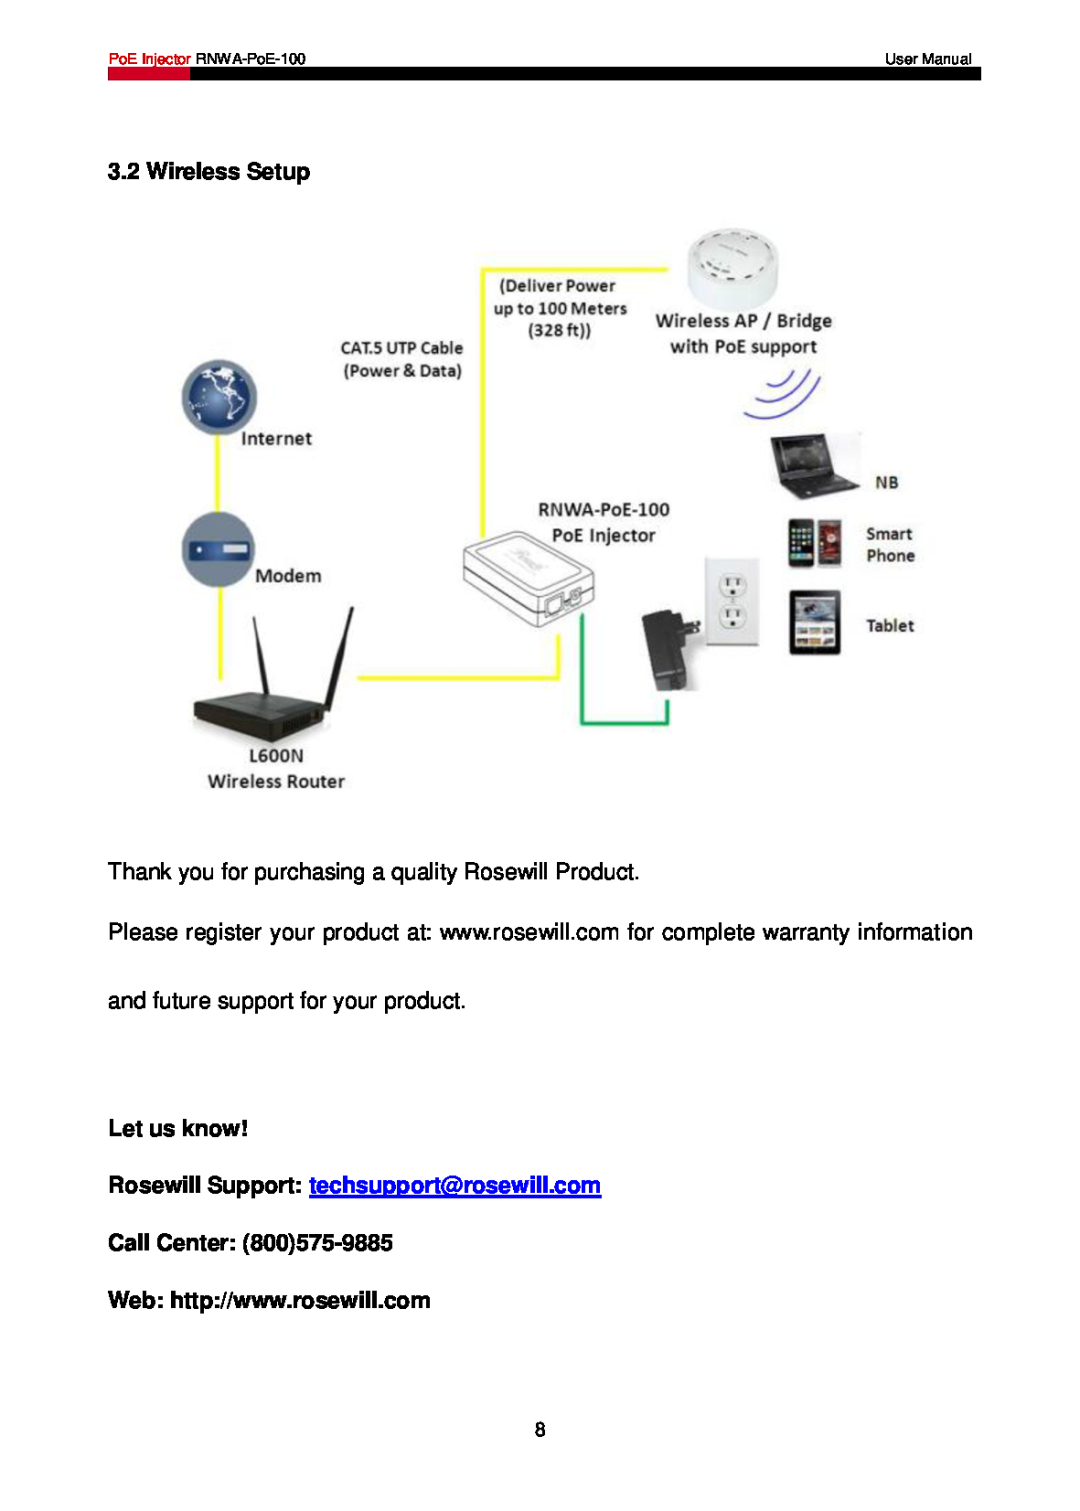 Rosewill RNWA-PoE-100 Wireless Setup, Let us know, Call Center, Rosewill Support techsupport@rosewill.com, User Manual 